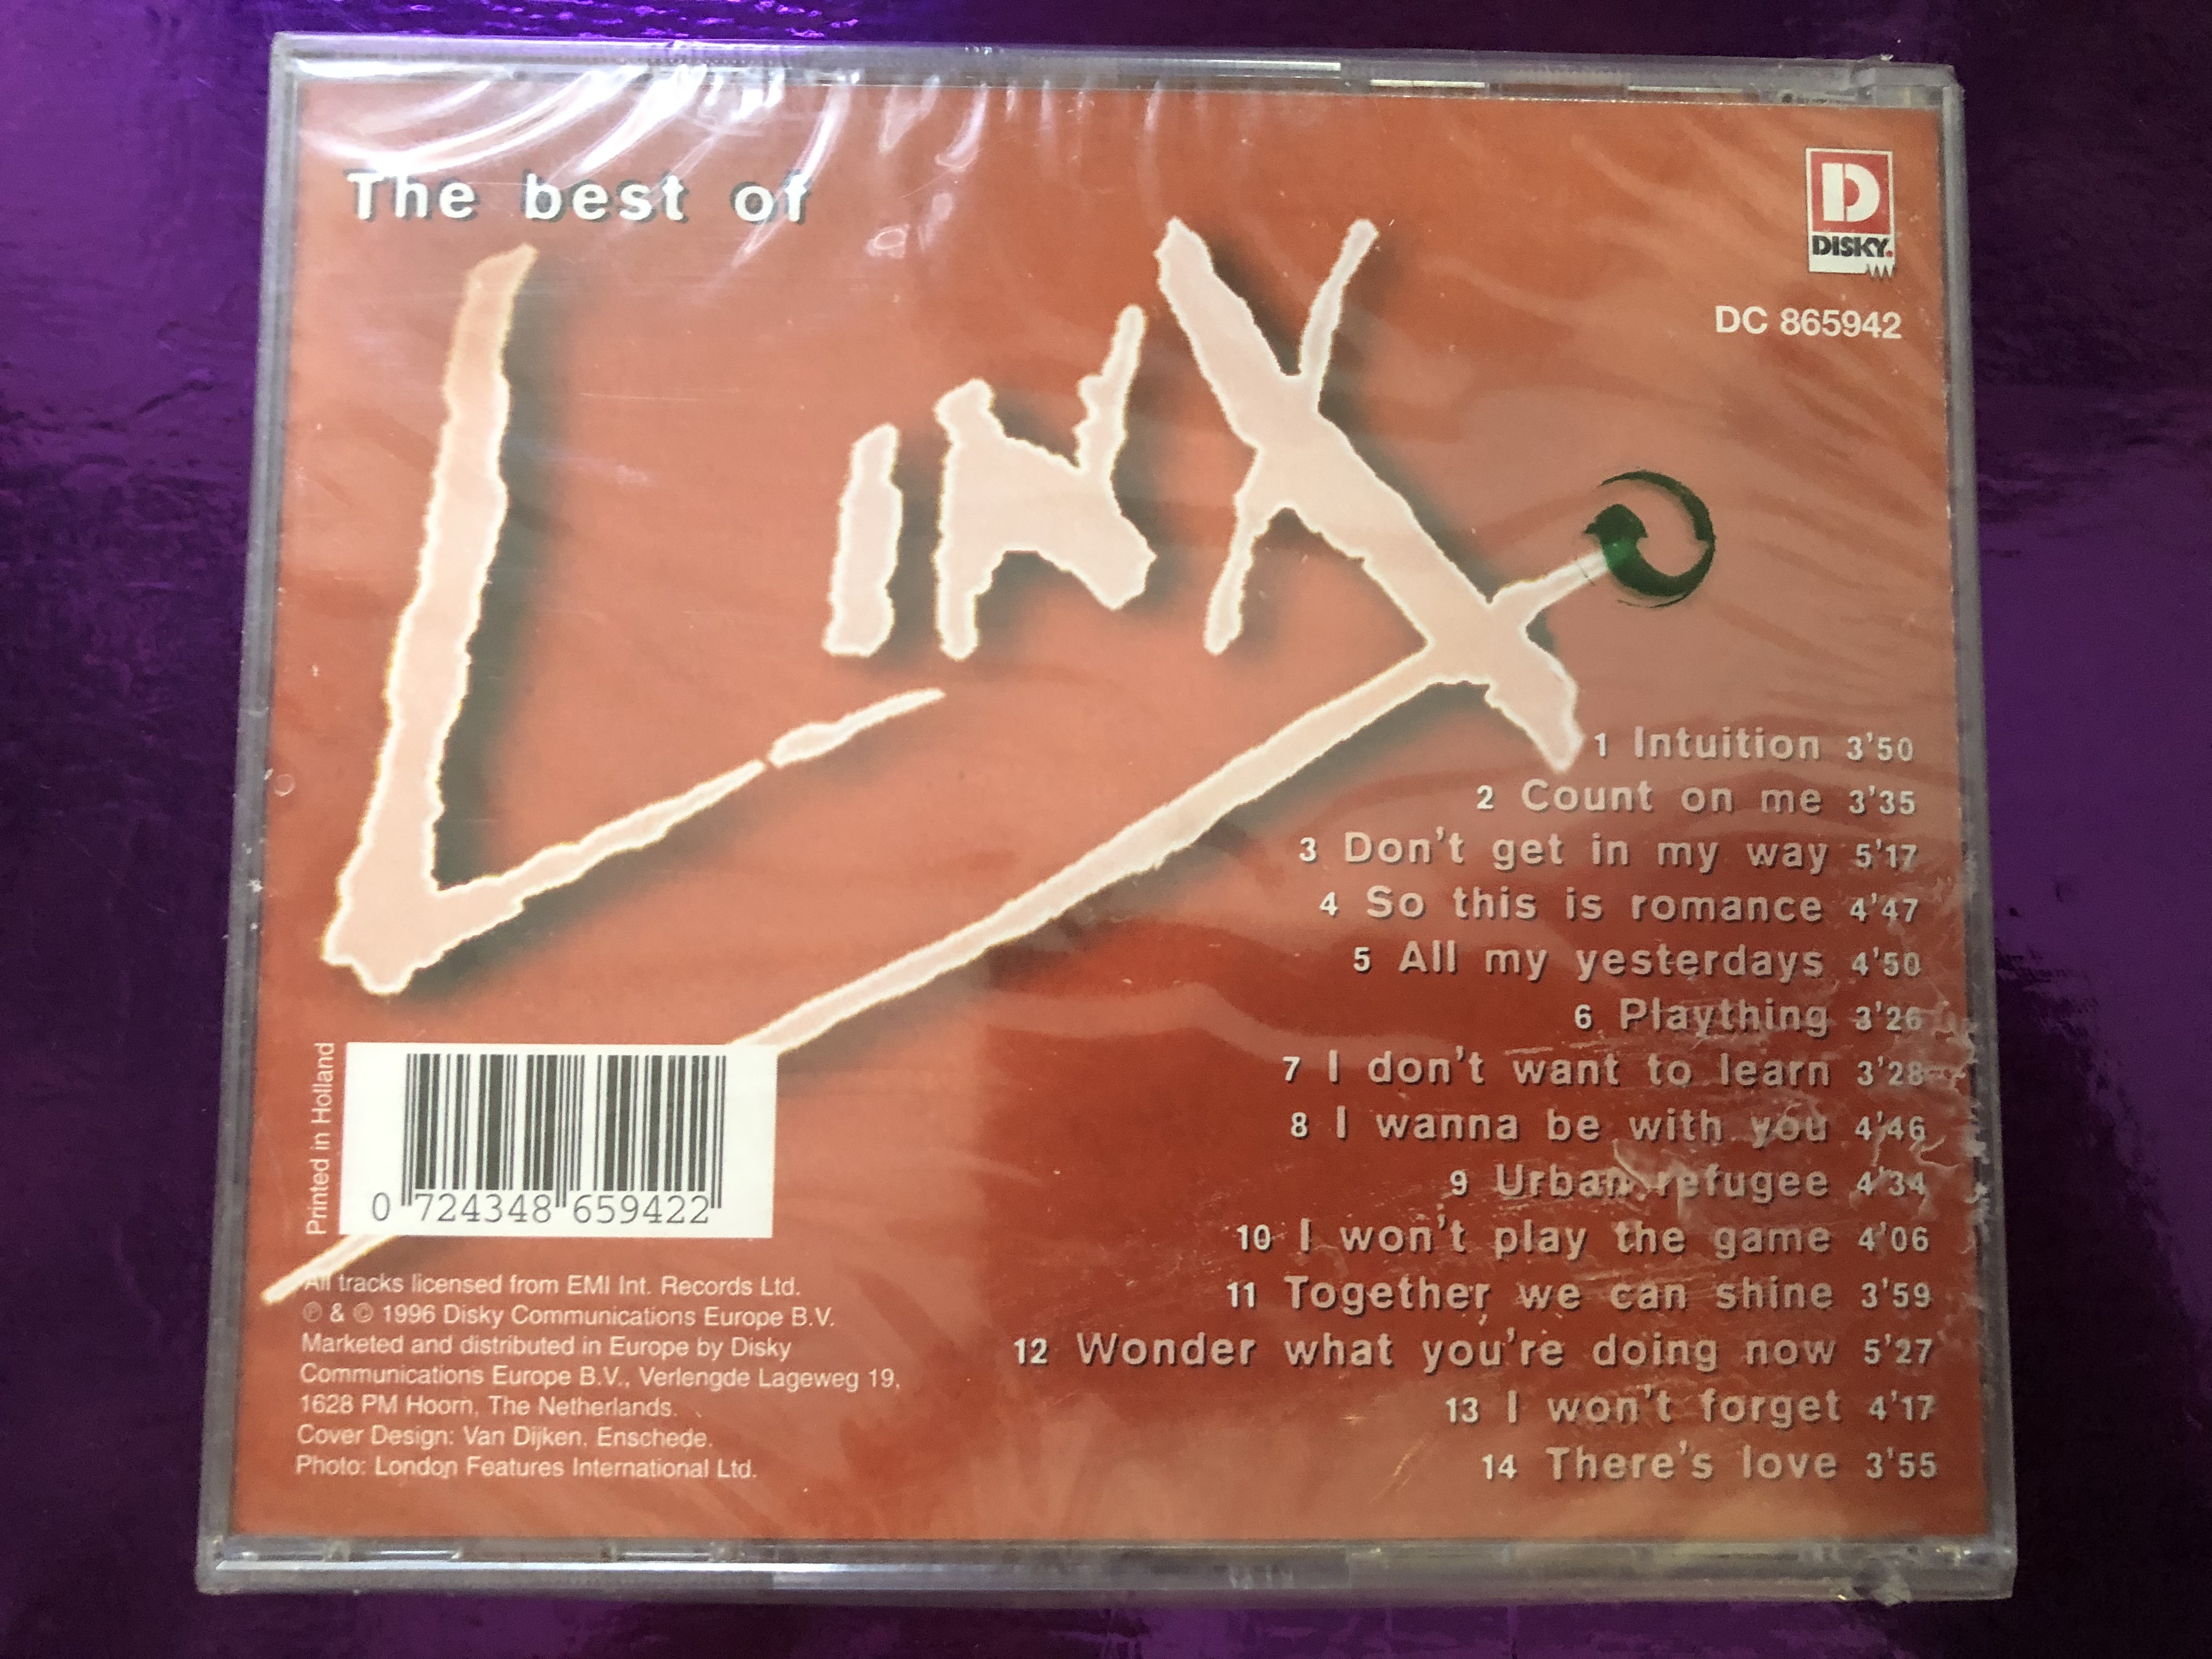 the-best-of-linx-intuition-so-this-is-romance-plaything-urban-refugee-together-we-can-shine-disky-audio-cd-1996-dc-865942-2-.jpg